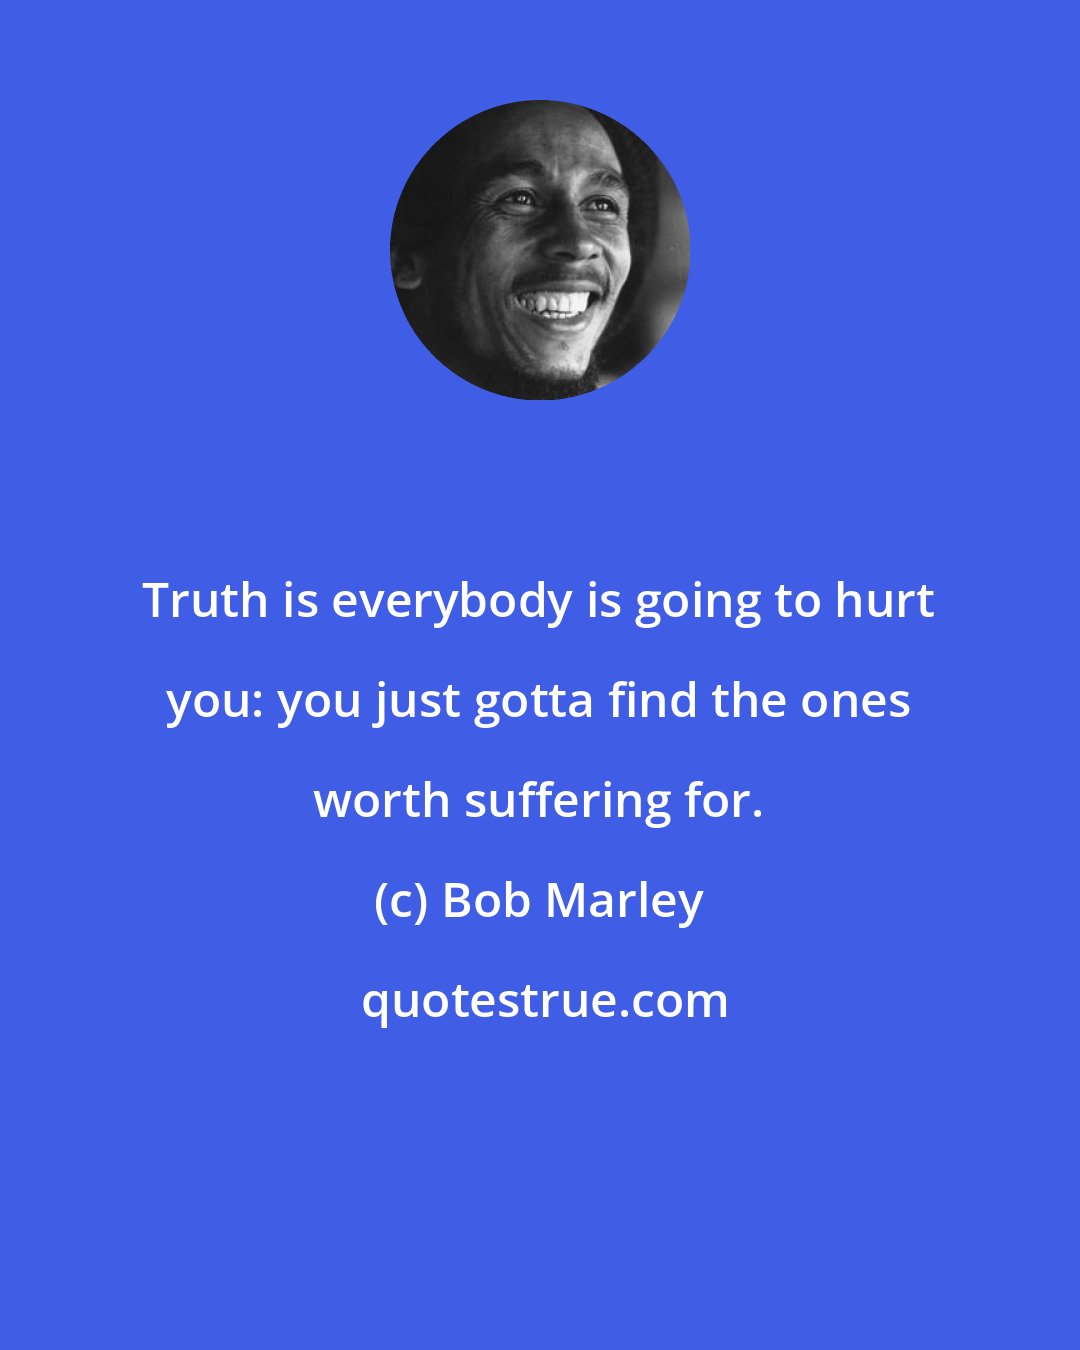 Bob Marley: Truth is everybody is going to hurt you: you just gotta find the ones worth suffering for.